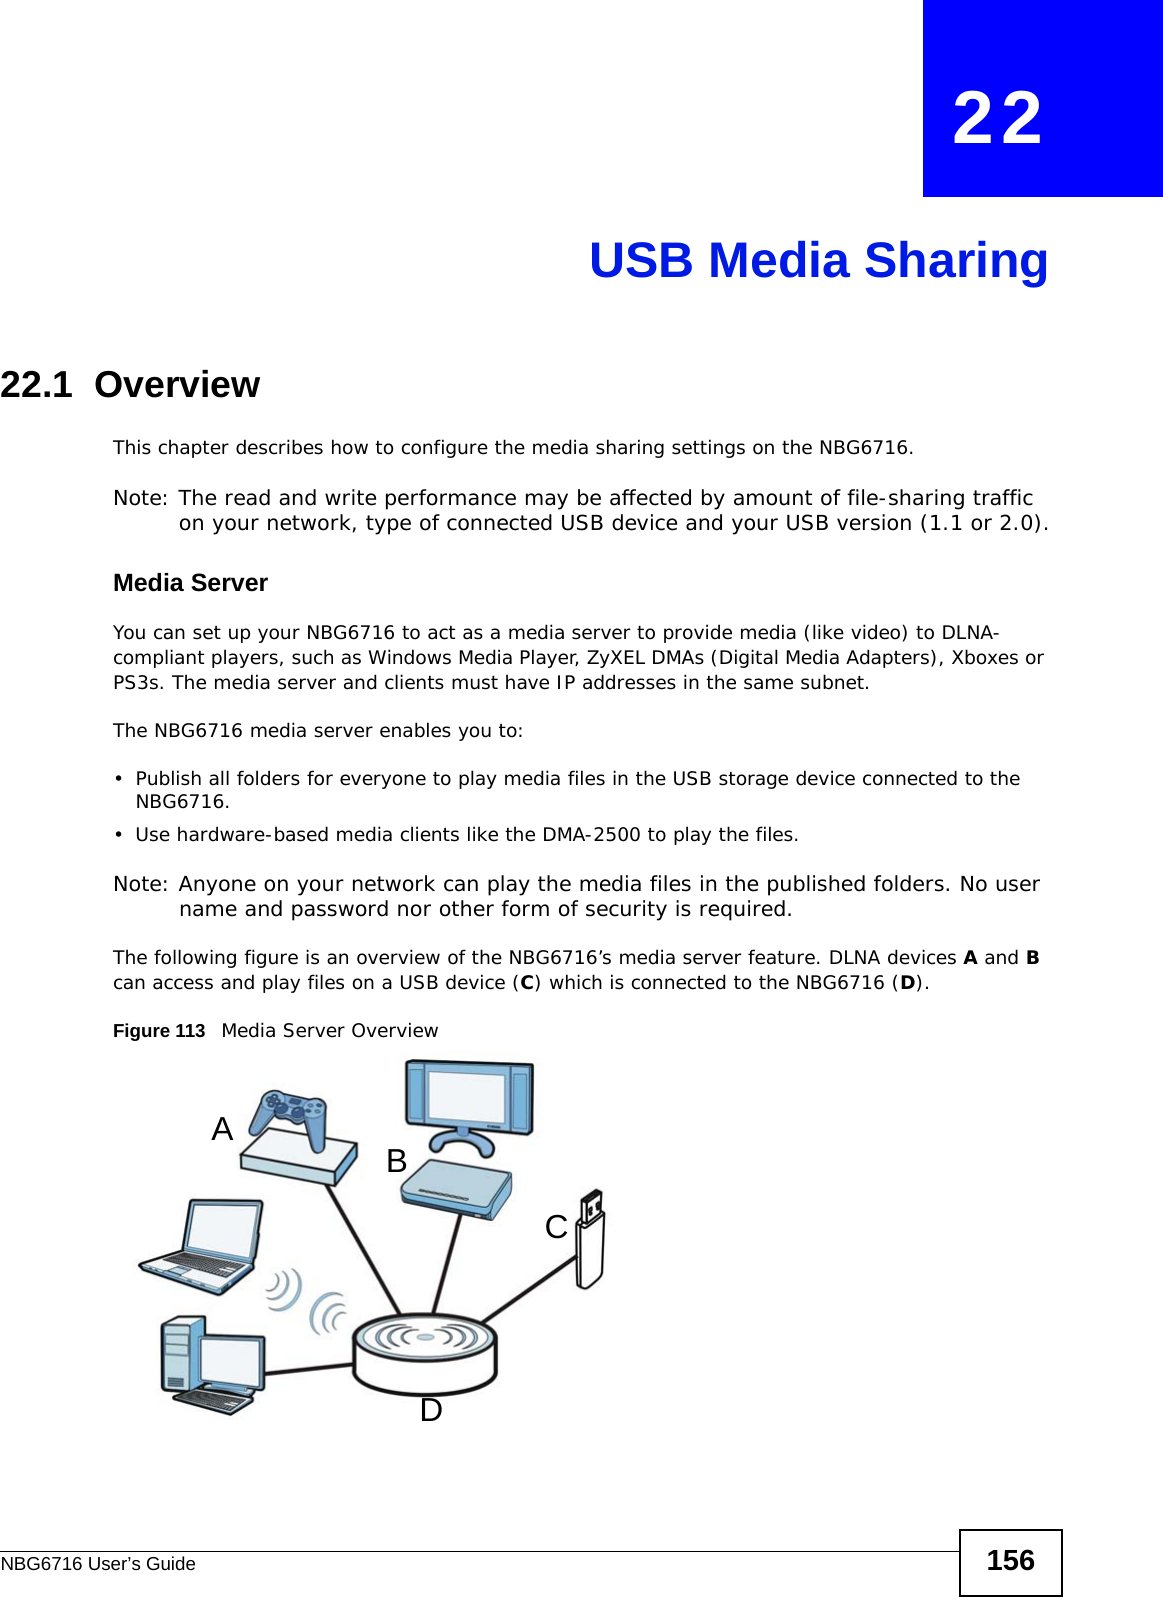 NBG6716 User’s Guide 156CHAPTER   22USB Media Sharing22.1  OverviewThis chapter describes how to configure the media sharing settings on the NBG6716.Note: The read and write performance may be affected by amount of file-sharing traffic on your network, type of connected USB device and your USB version (1.1 or 2.0).Media ServerYou can set up your NBG6716 to act as a media server to provide media (like video) to DLNA-compliant players, such as Windows Media Player, ZyXEL DMAs (Digital Media Adapters), Xboxes or PS3s. The media server and clients must have IP addresses in the same subnet.The NBG6716 media server enables you to:• Publish all folders for everyone to play media files in the USB storage device connected to the NBG6716.• Use hardware-based media clients like the DMA-2500 to play the files.Note: Anyone on your network can play the media files in the published folders. No user name and password nor other form of security is required. The following figure is an overview of the NBG6716’s media server feature. DLNA devices A and B can access and play files on a USB device (C) which is connected to the NBG6716 (D).Figure 113   Media Server OverviewABCD